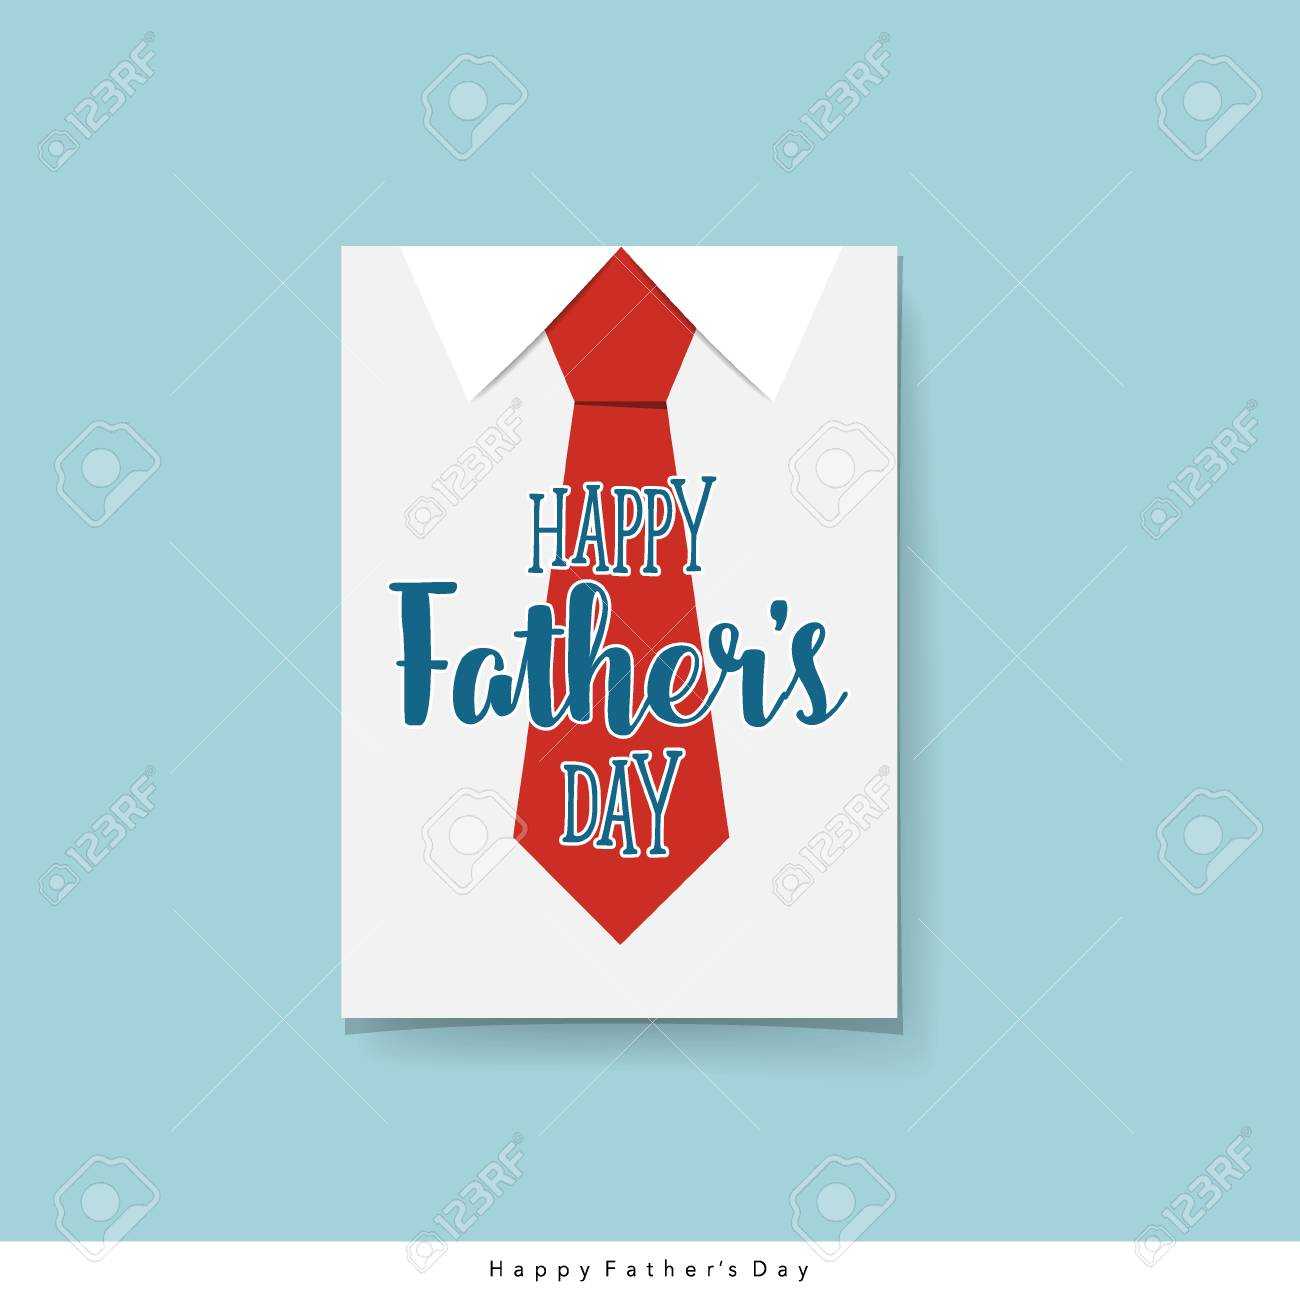 Happy Fathers Day Card Design With Big Tie. Vector Illustration. In Fathers Day Card Template